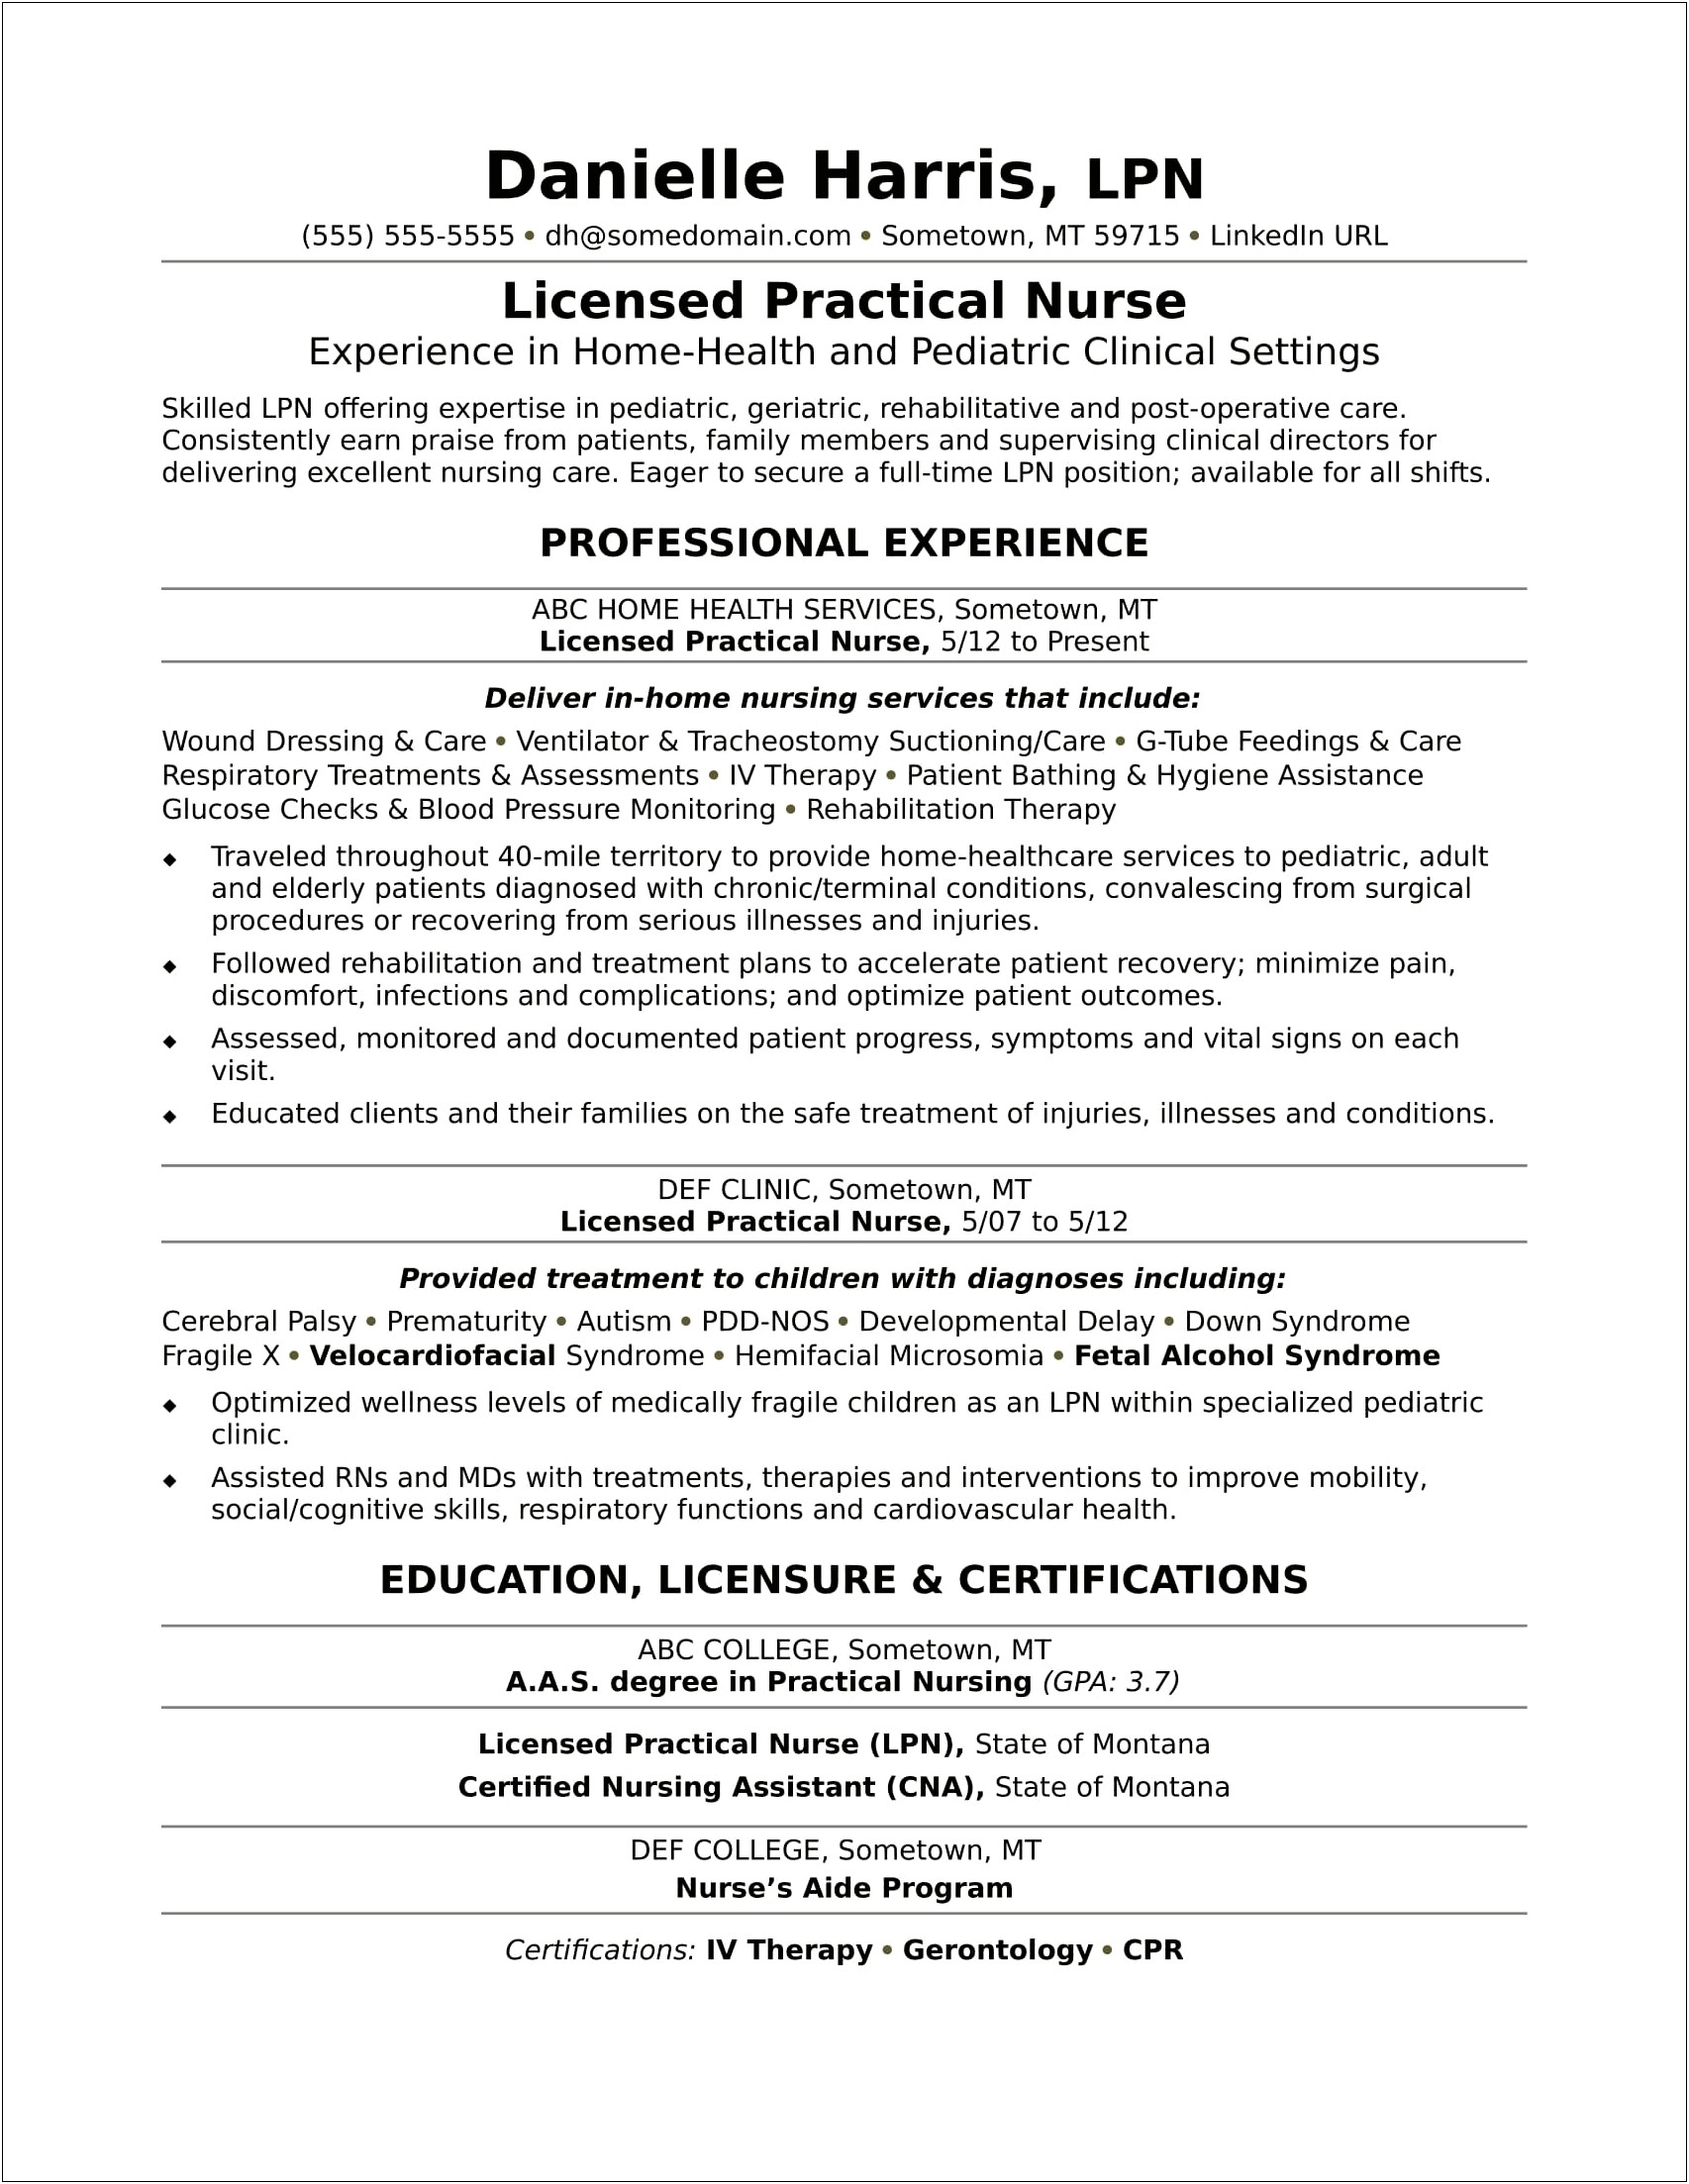 Resumes Of People Looking For Lvn Jobs